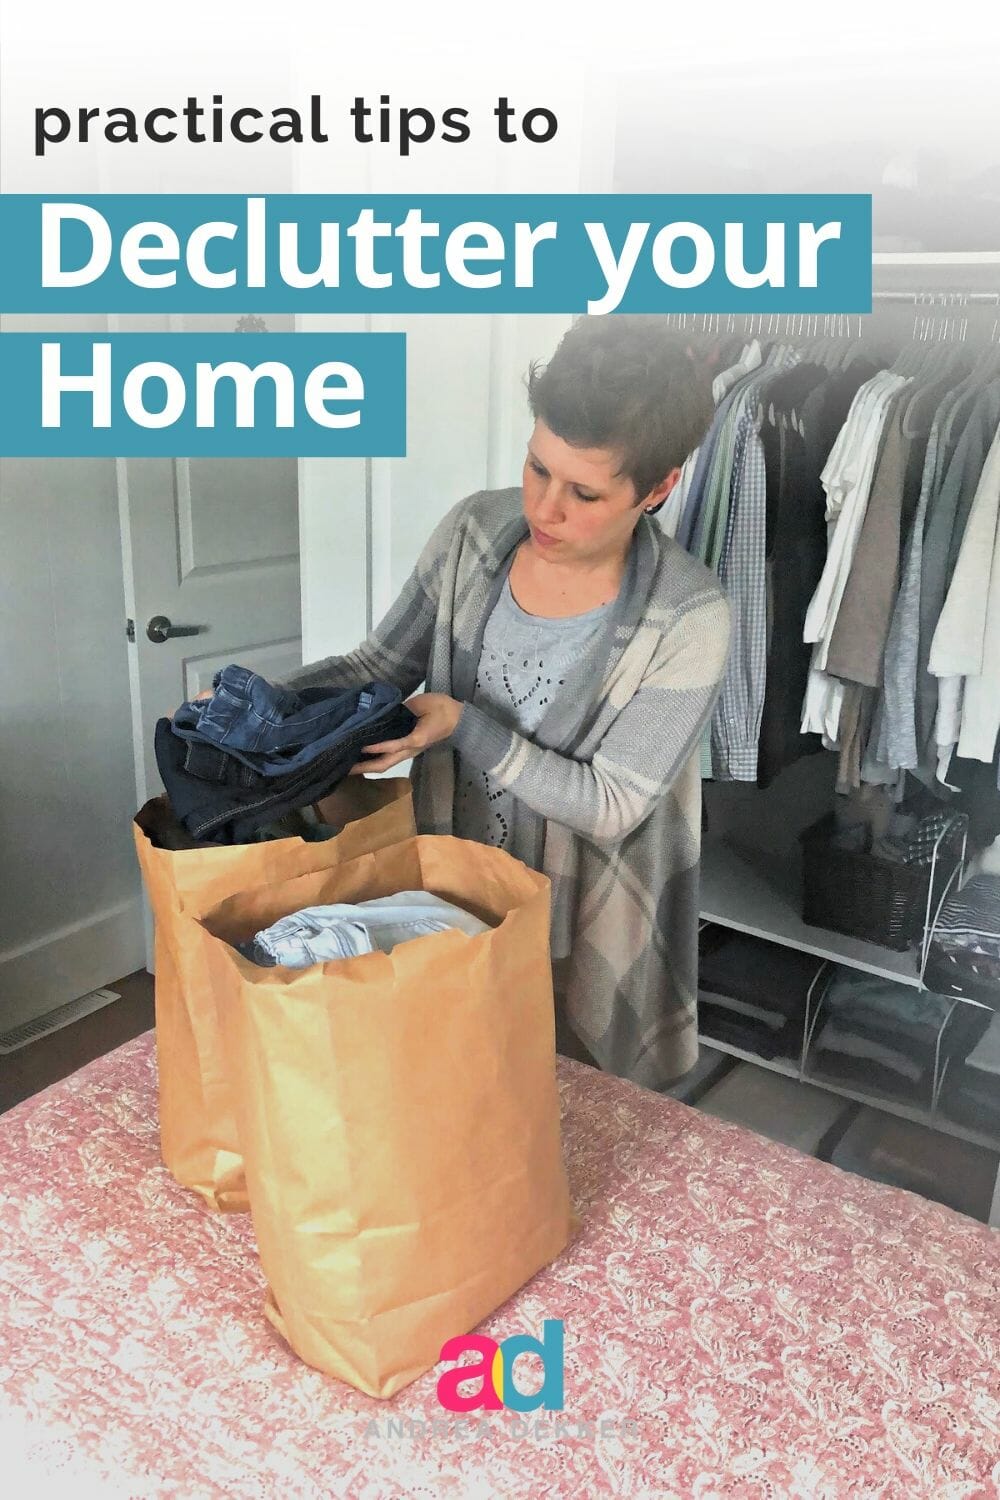 These 10 practical no-nonsense tips will help you declutter your home, even when donation centers are closed! via @andreadekker